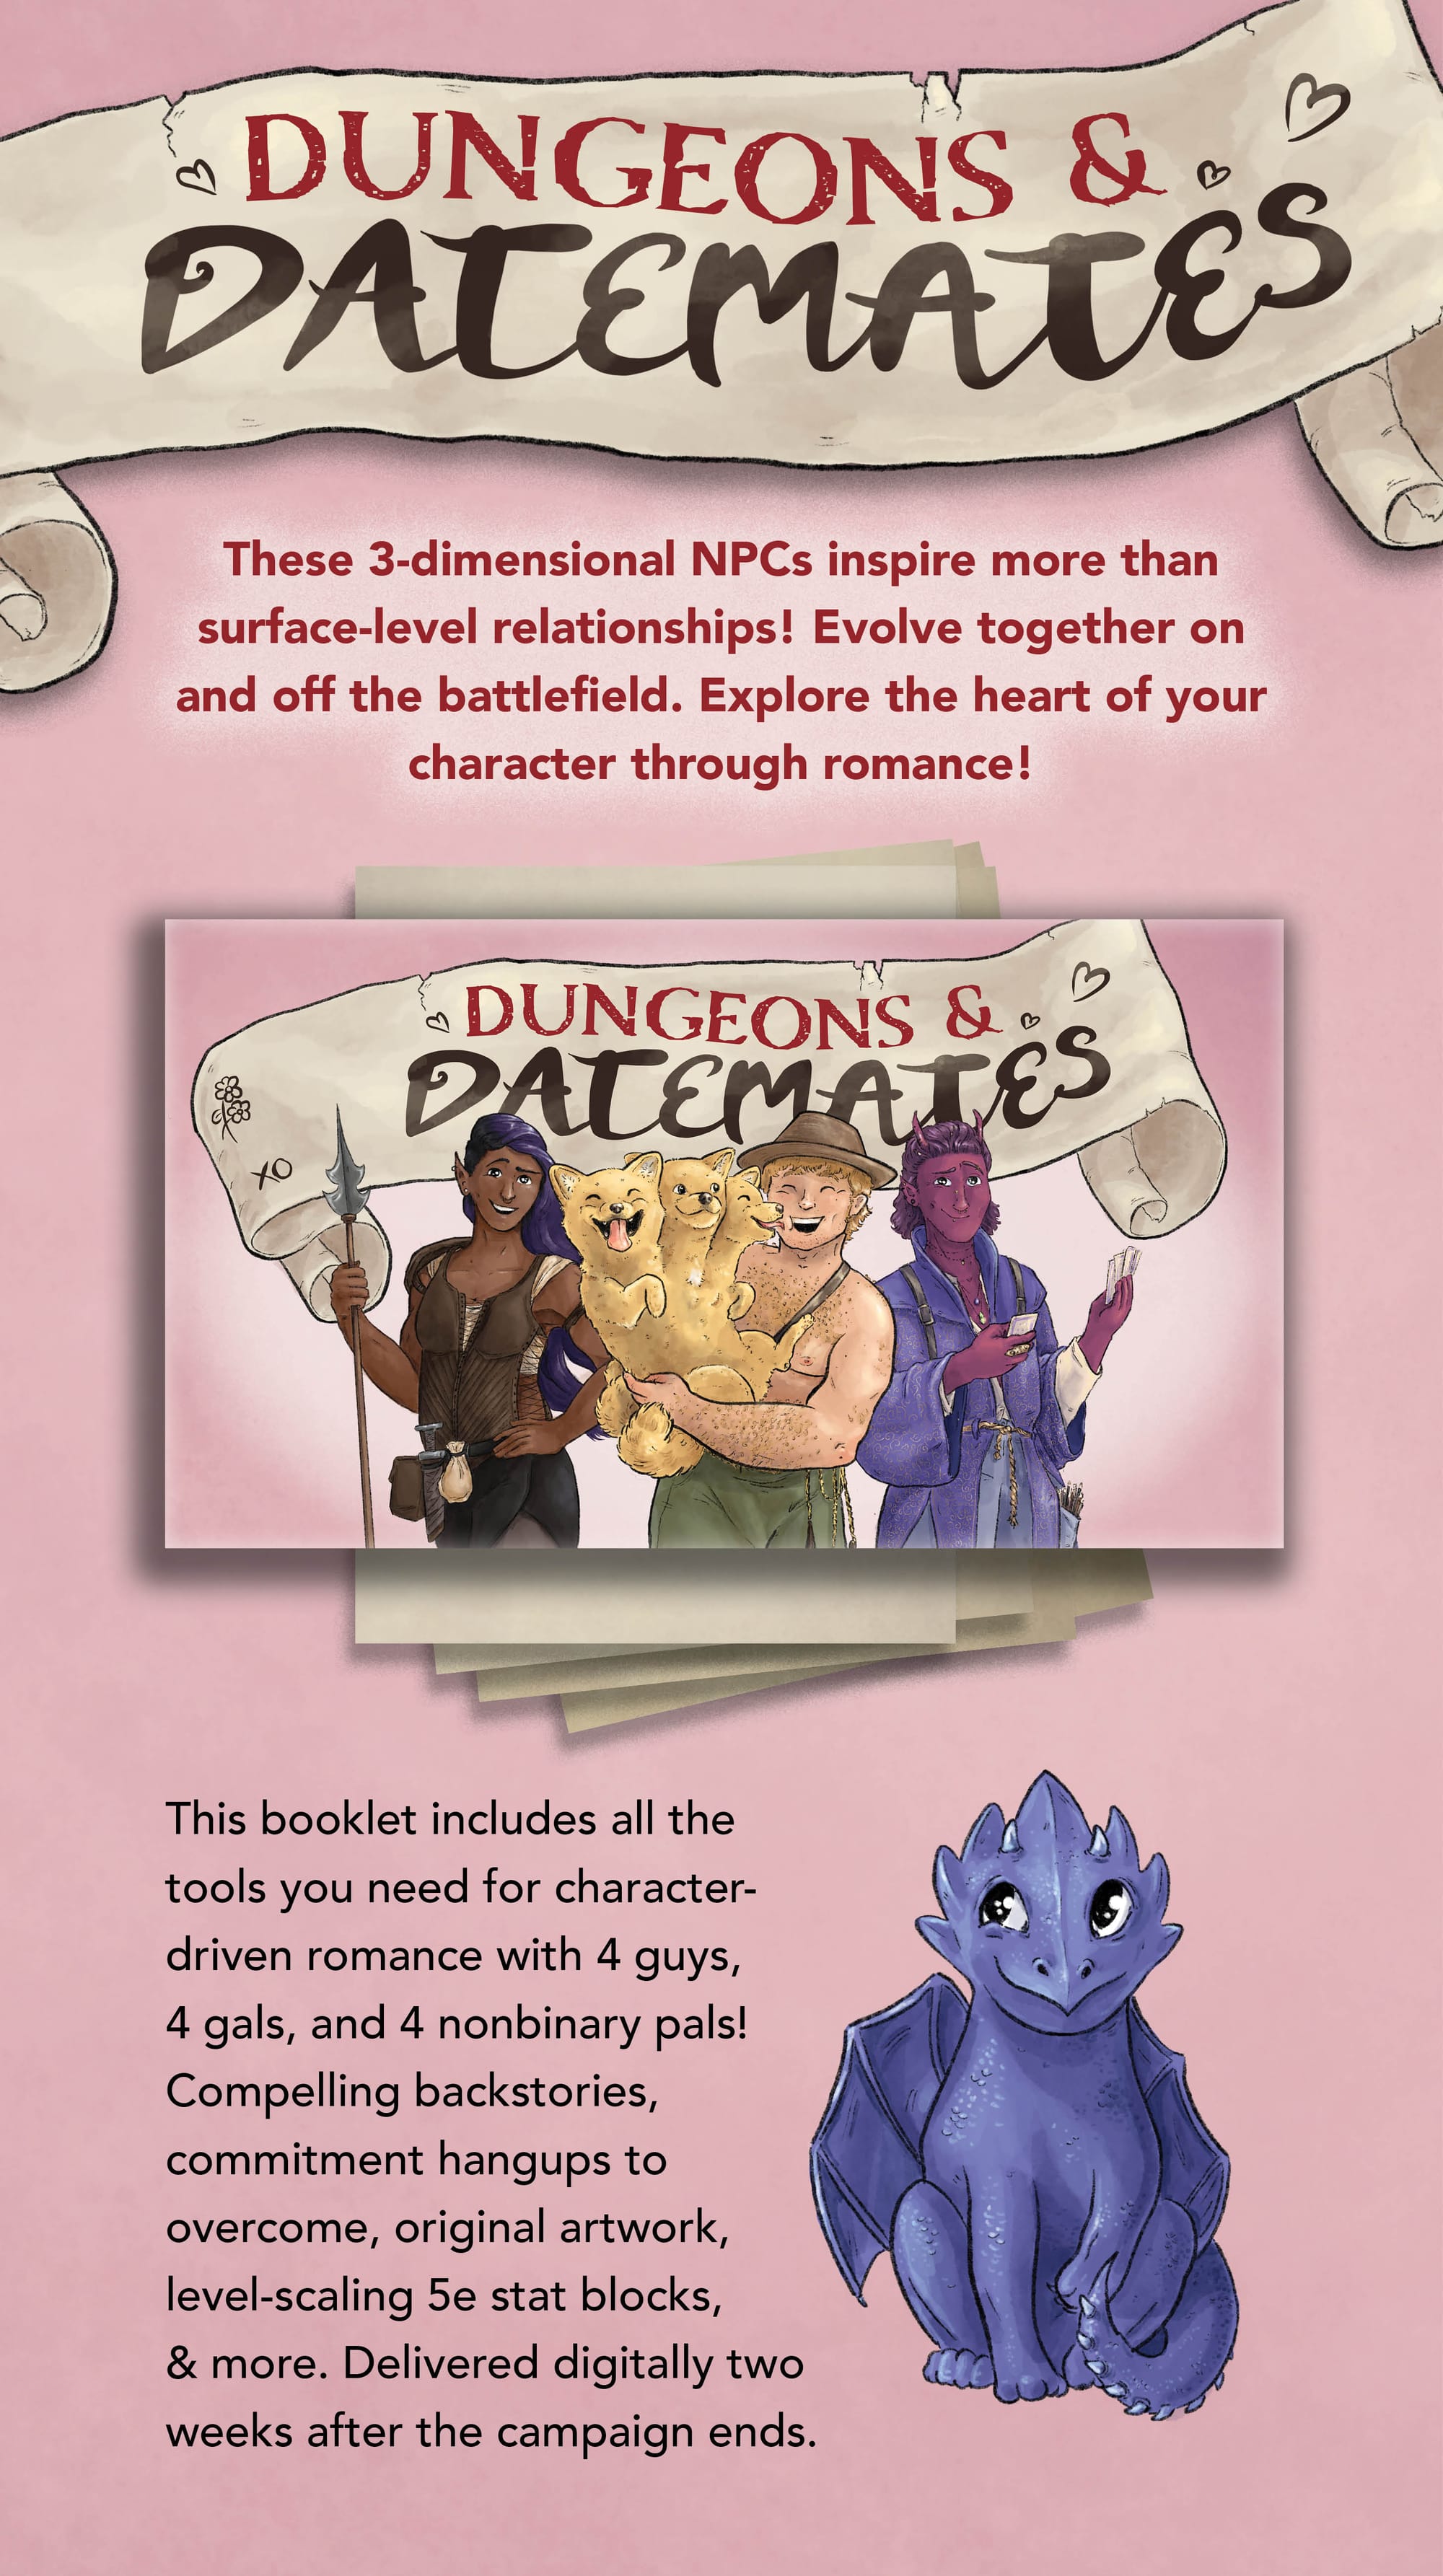 Dungeons & Datemates: 12 Romance NPCs to facilitate character growth & roleplay